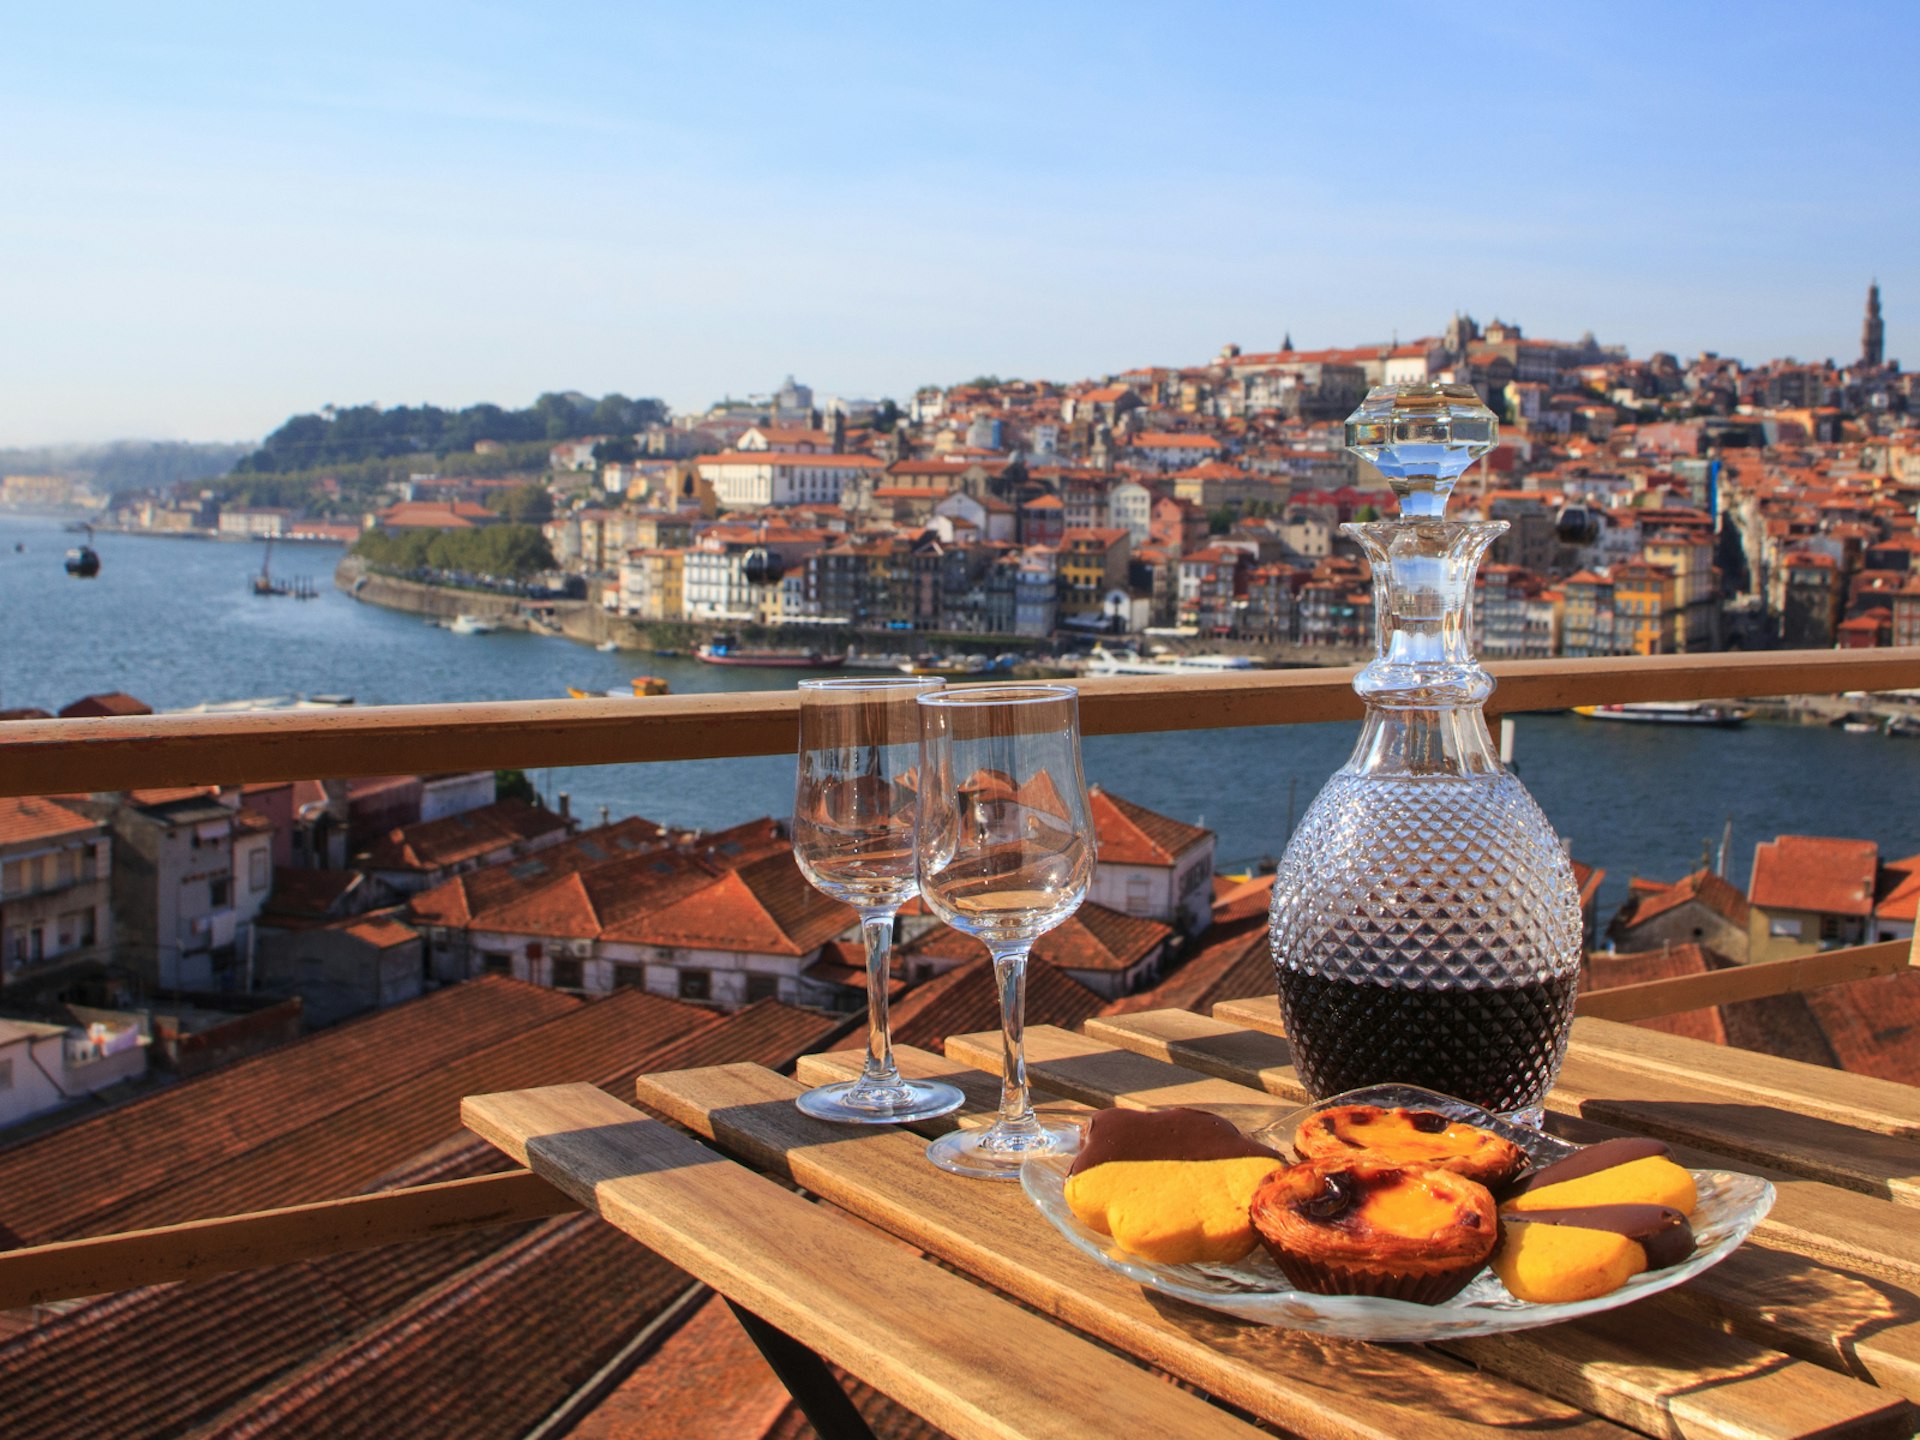 A decanter of port and a plate of pastel de nata at a cafe overlooking the city of Porto, Portugal